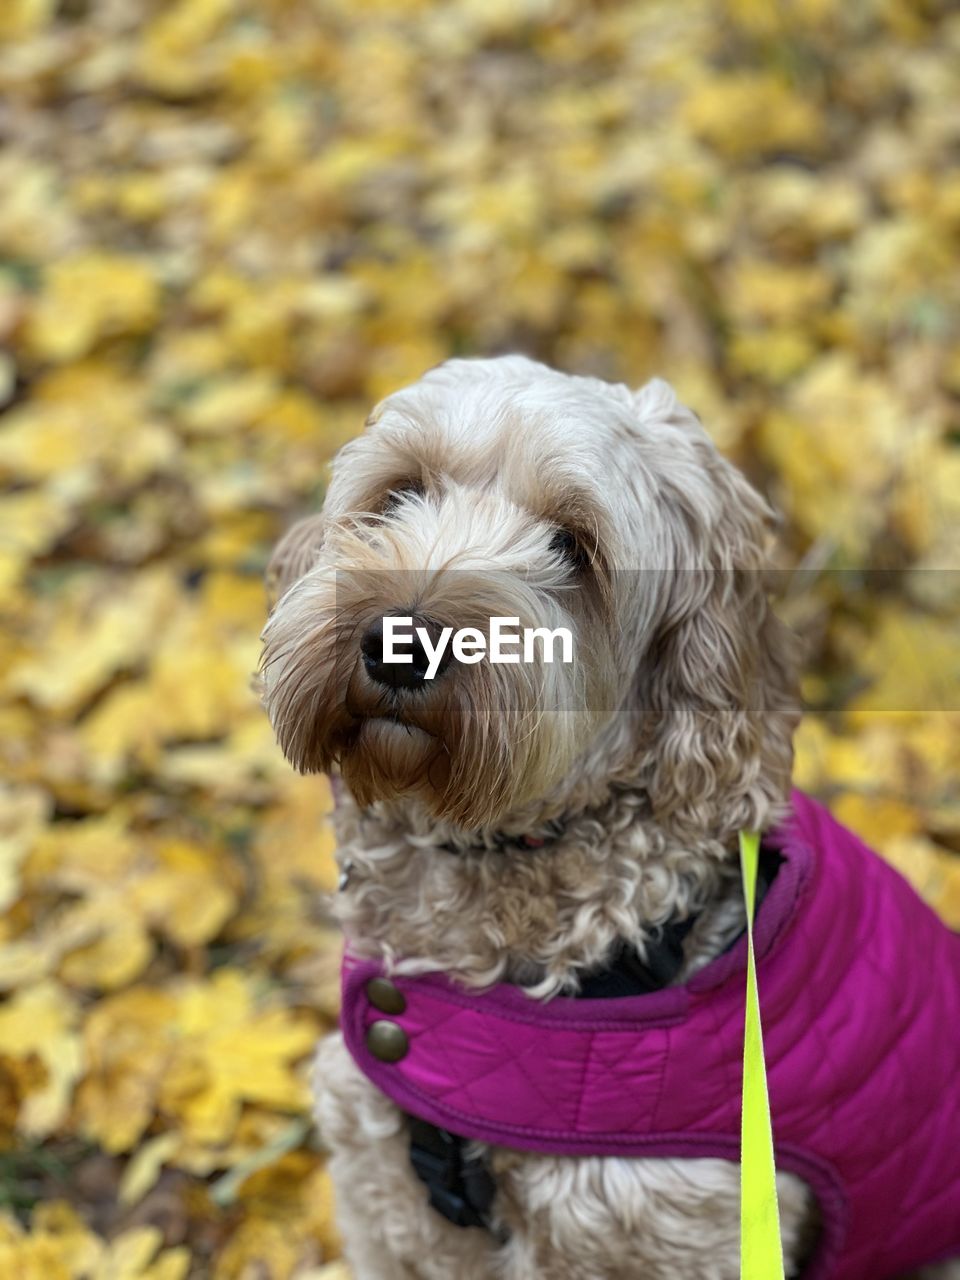 one animal, canine, dog, domestic animals, pet, animal themes, animal, mammal, autumn, collar, portrait, pet collar, animal hair, puppy, cockapoo, focus on foreground, cute, lap dog, day, clothing, nature, looking at camera, leash, animal body part, no people, outdoors